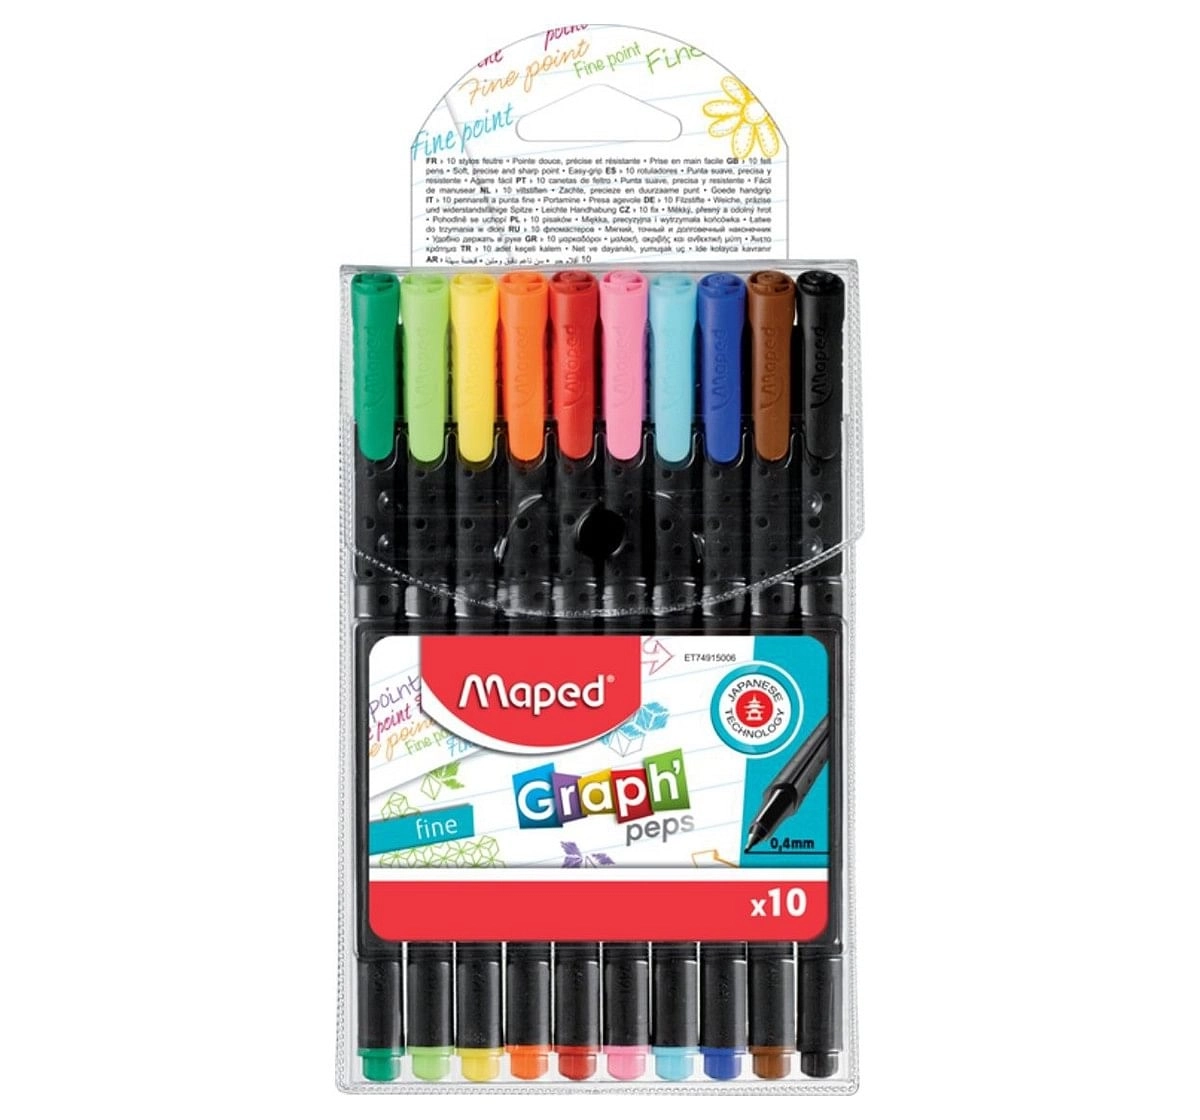 Maped 10 Graphpeps Fineliners Assorted, Unisex 7Y+ (Multicolour)